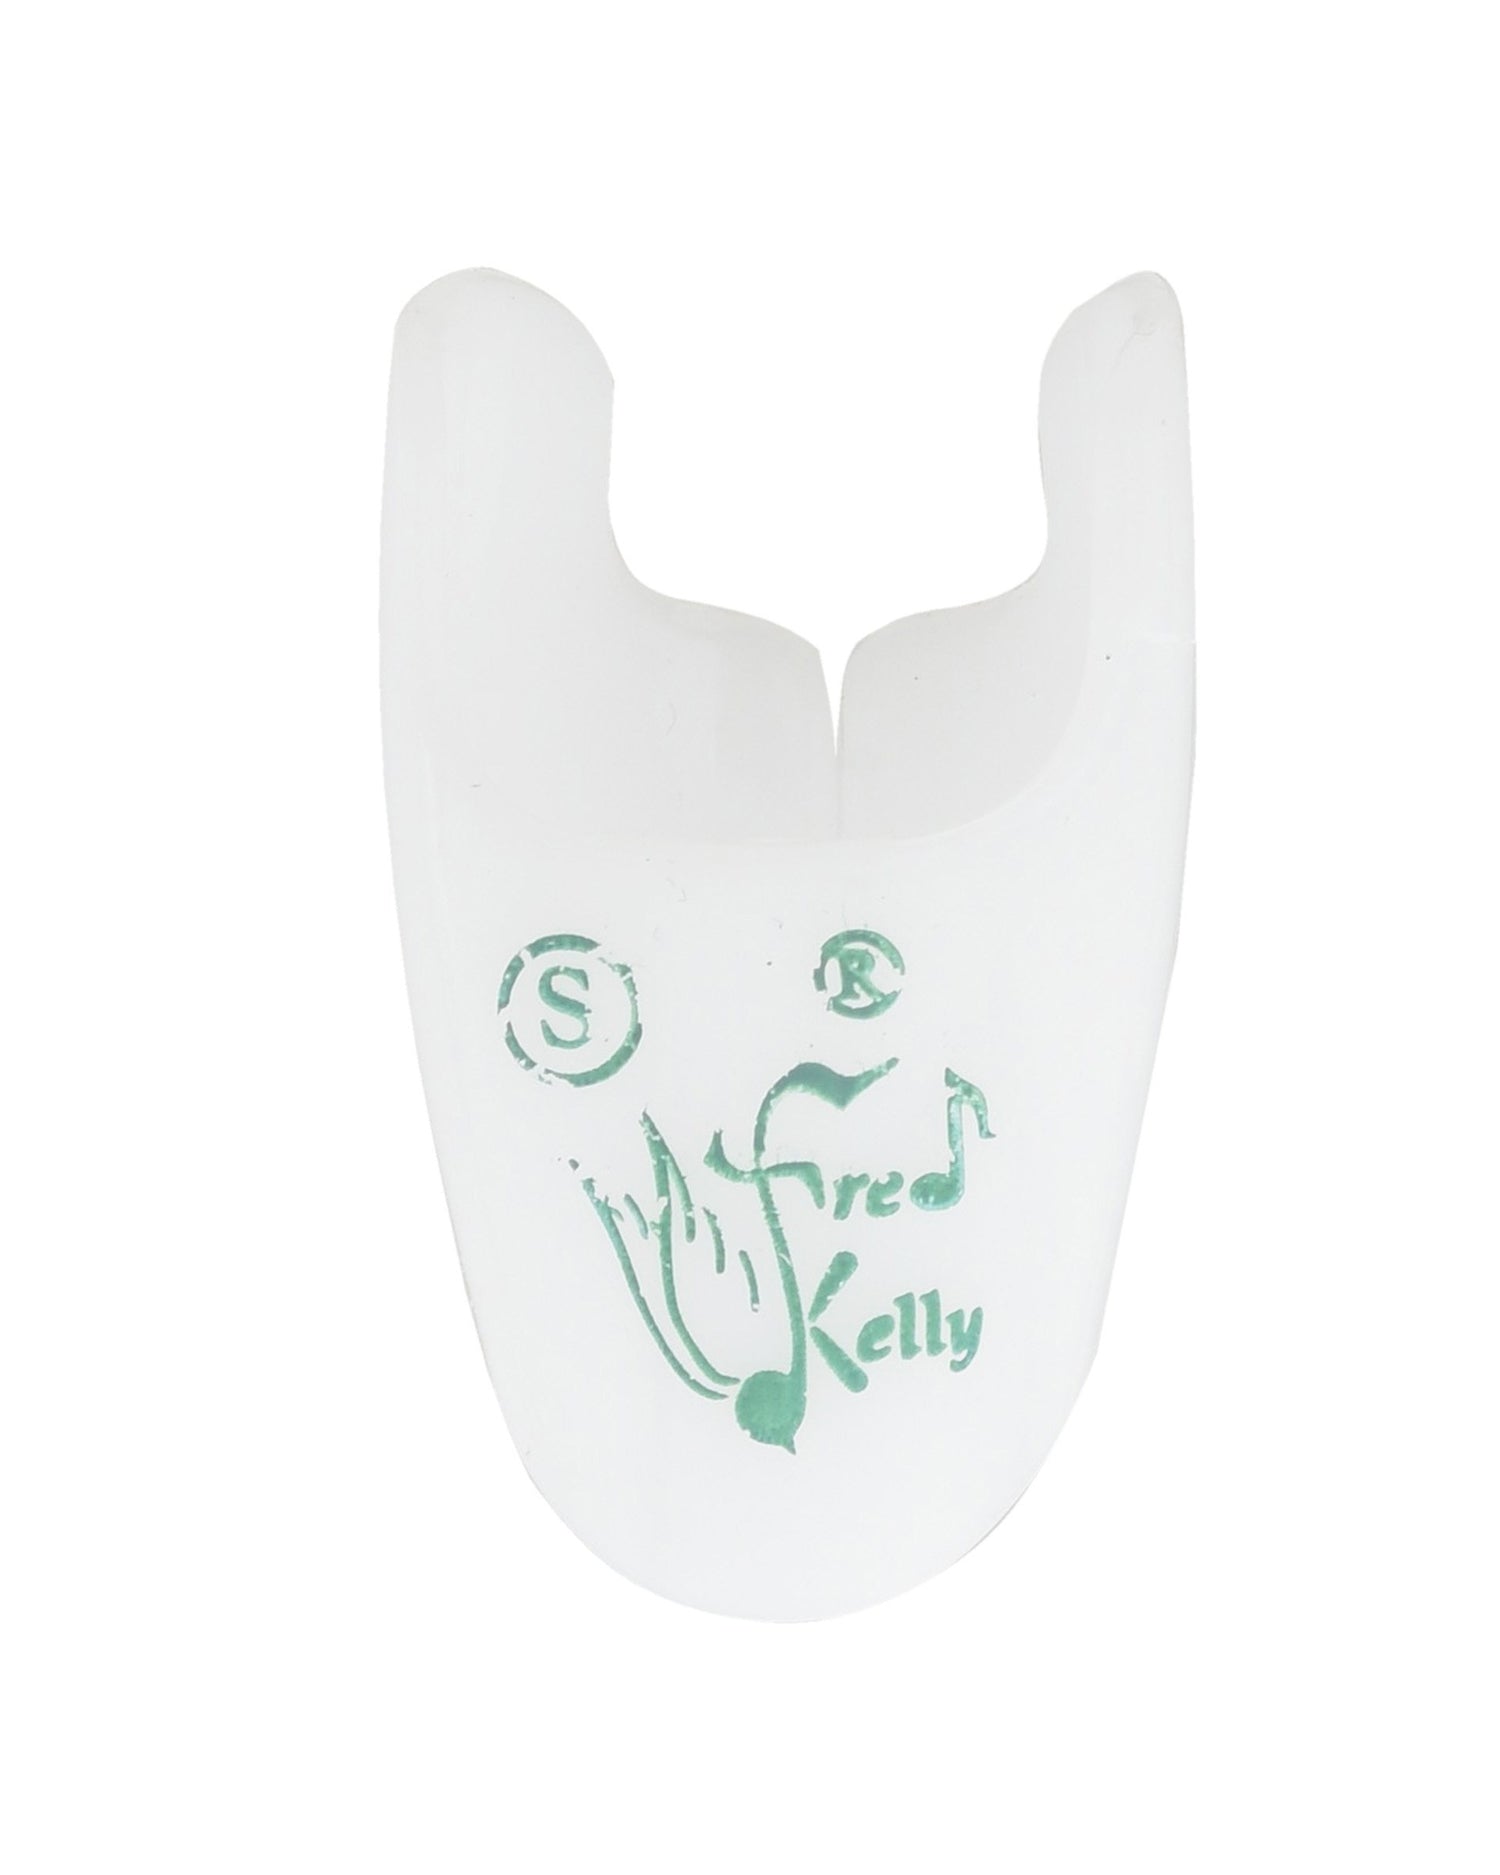 Image 1 of Fred Kelly Freedom Finger Pick Delrin - Small - SKU# PKFP-DELRIN-S : Product Type Accessories & Parts : Elderly Instruments